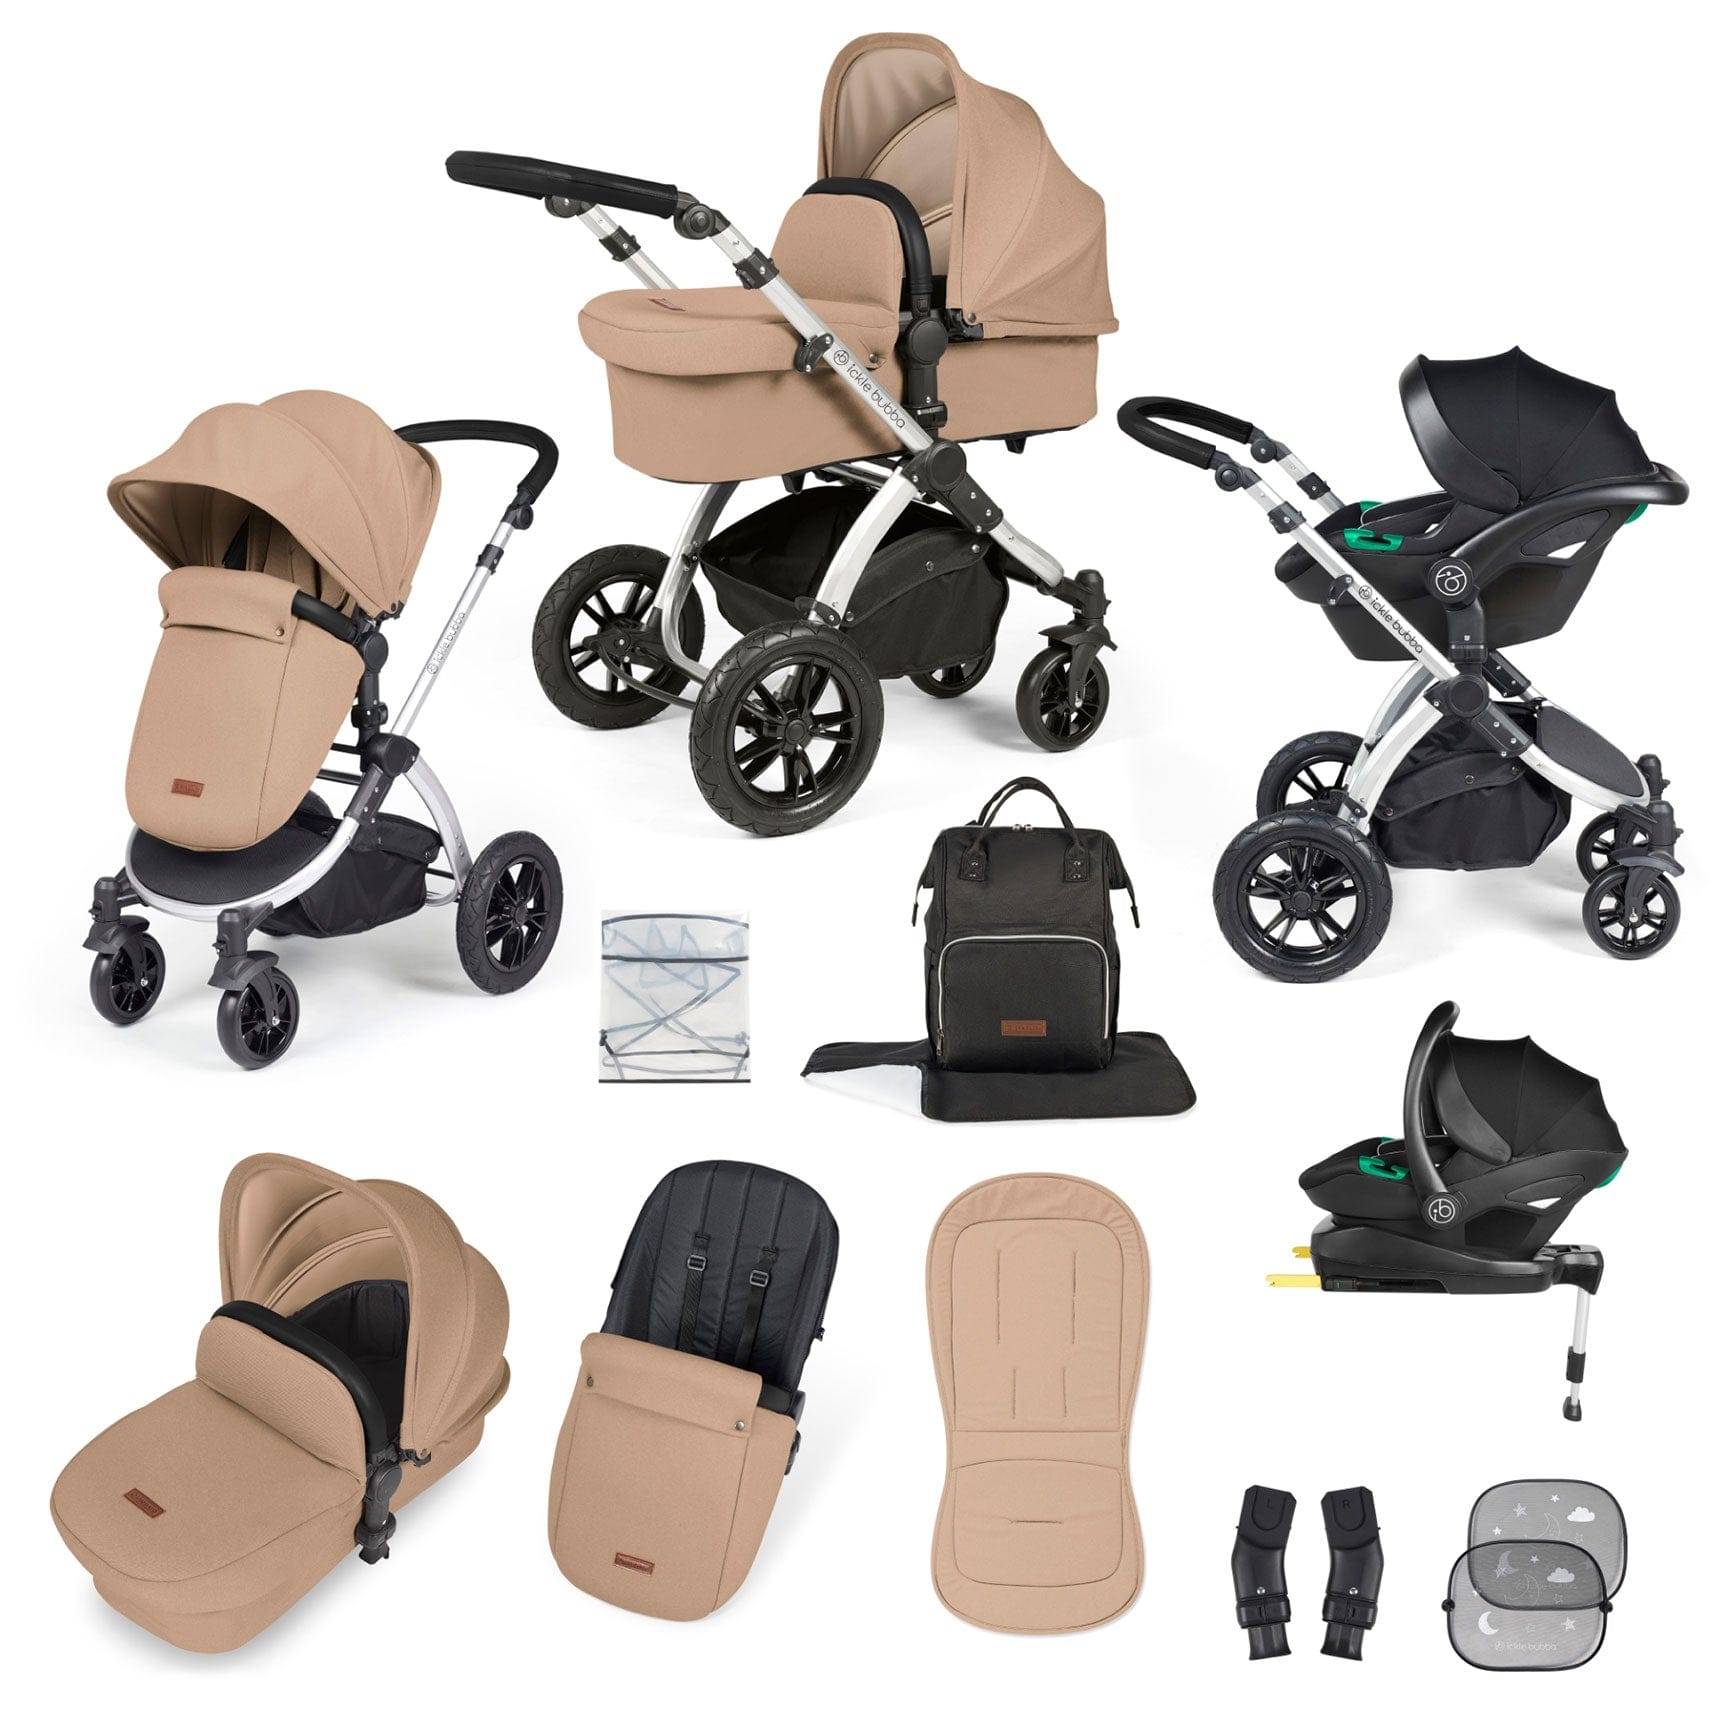 Ickle Bubba travel systems Ickle Bubba Stomp Luxe All-in-One Travel System with Isofix Base - Silver/Desert/Black 10-011-300-257